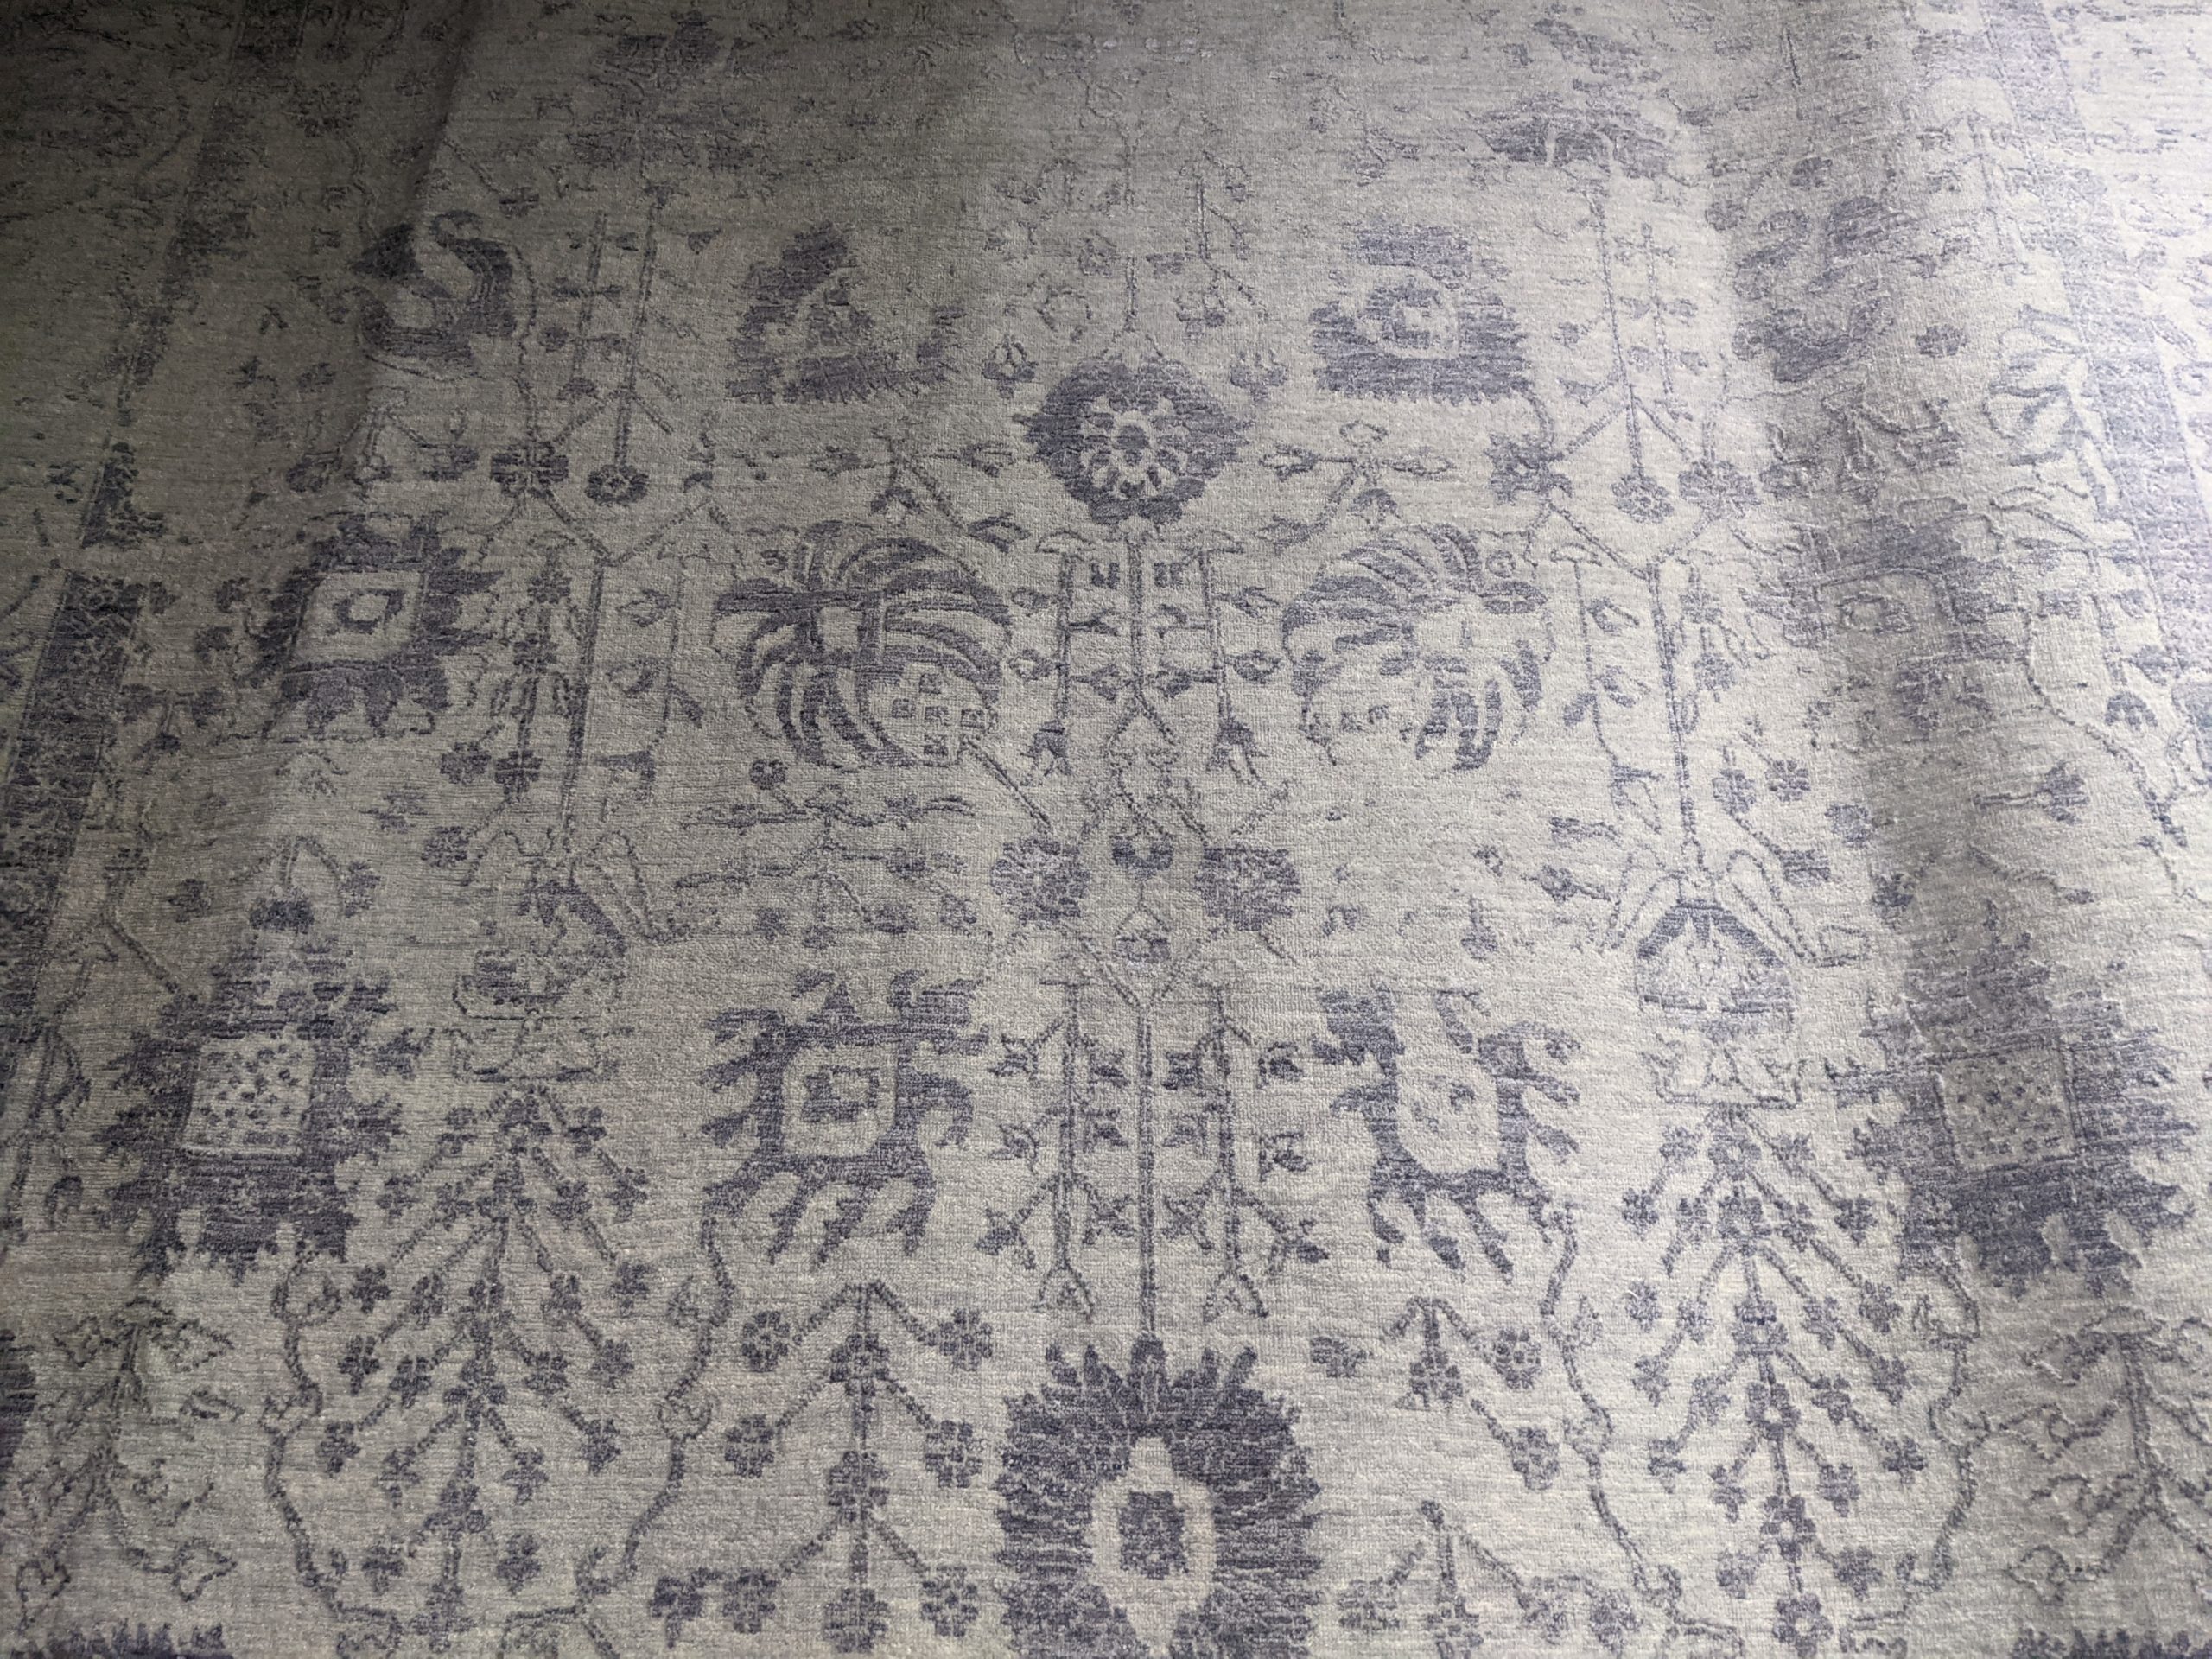 Antiqued Style Rug